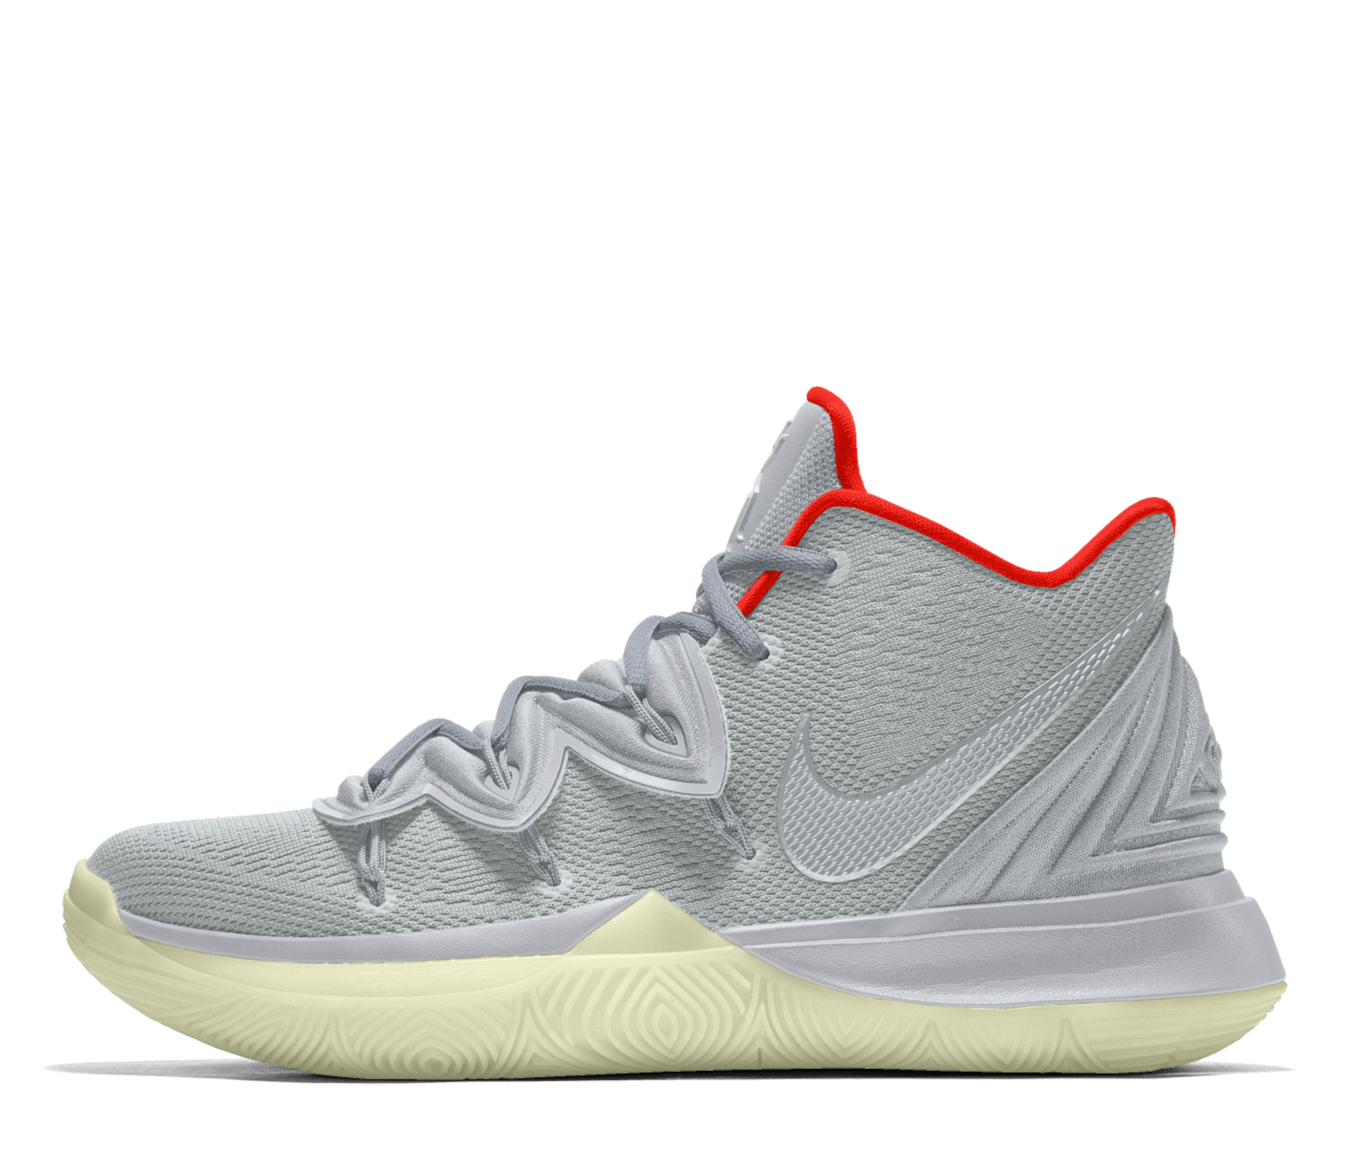 Kyrie 5 X Patrick Basketball Shoes for Men and Women